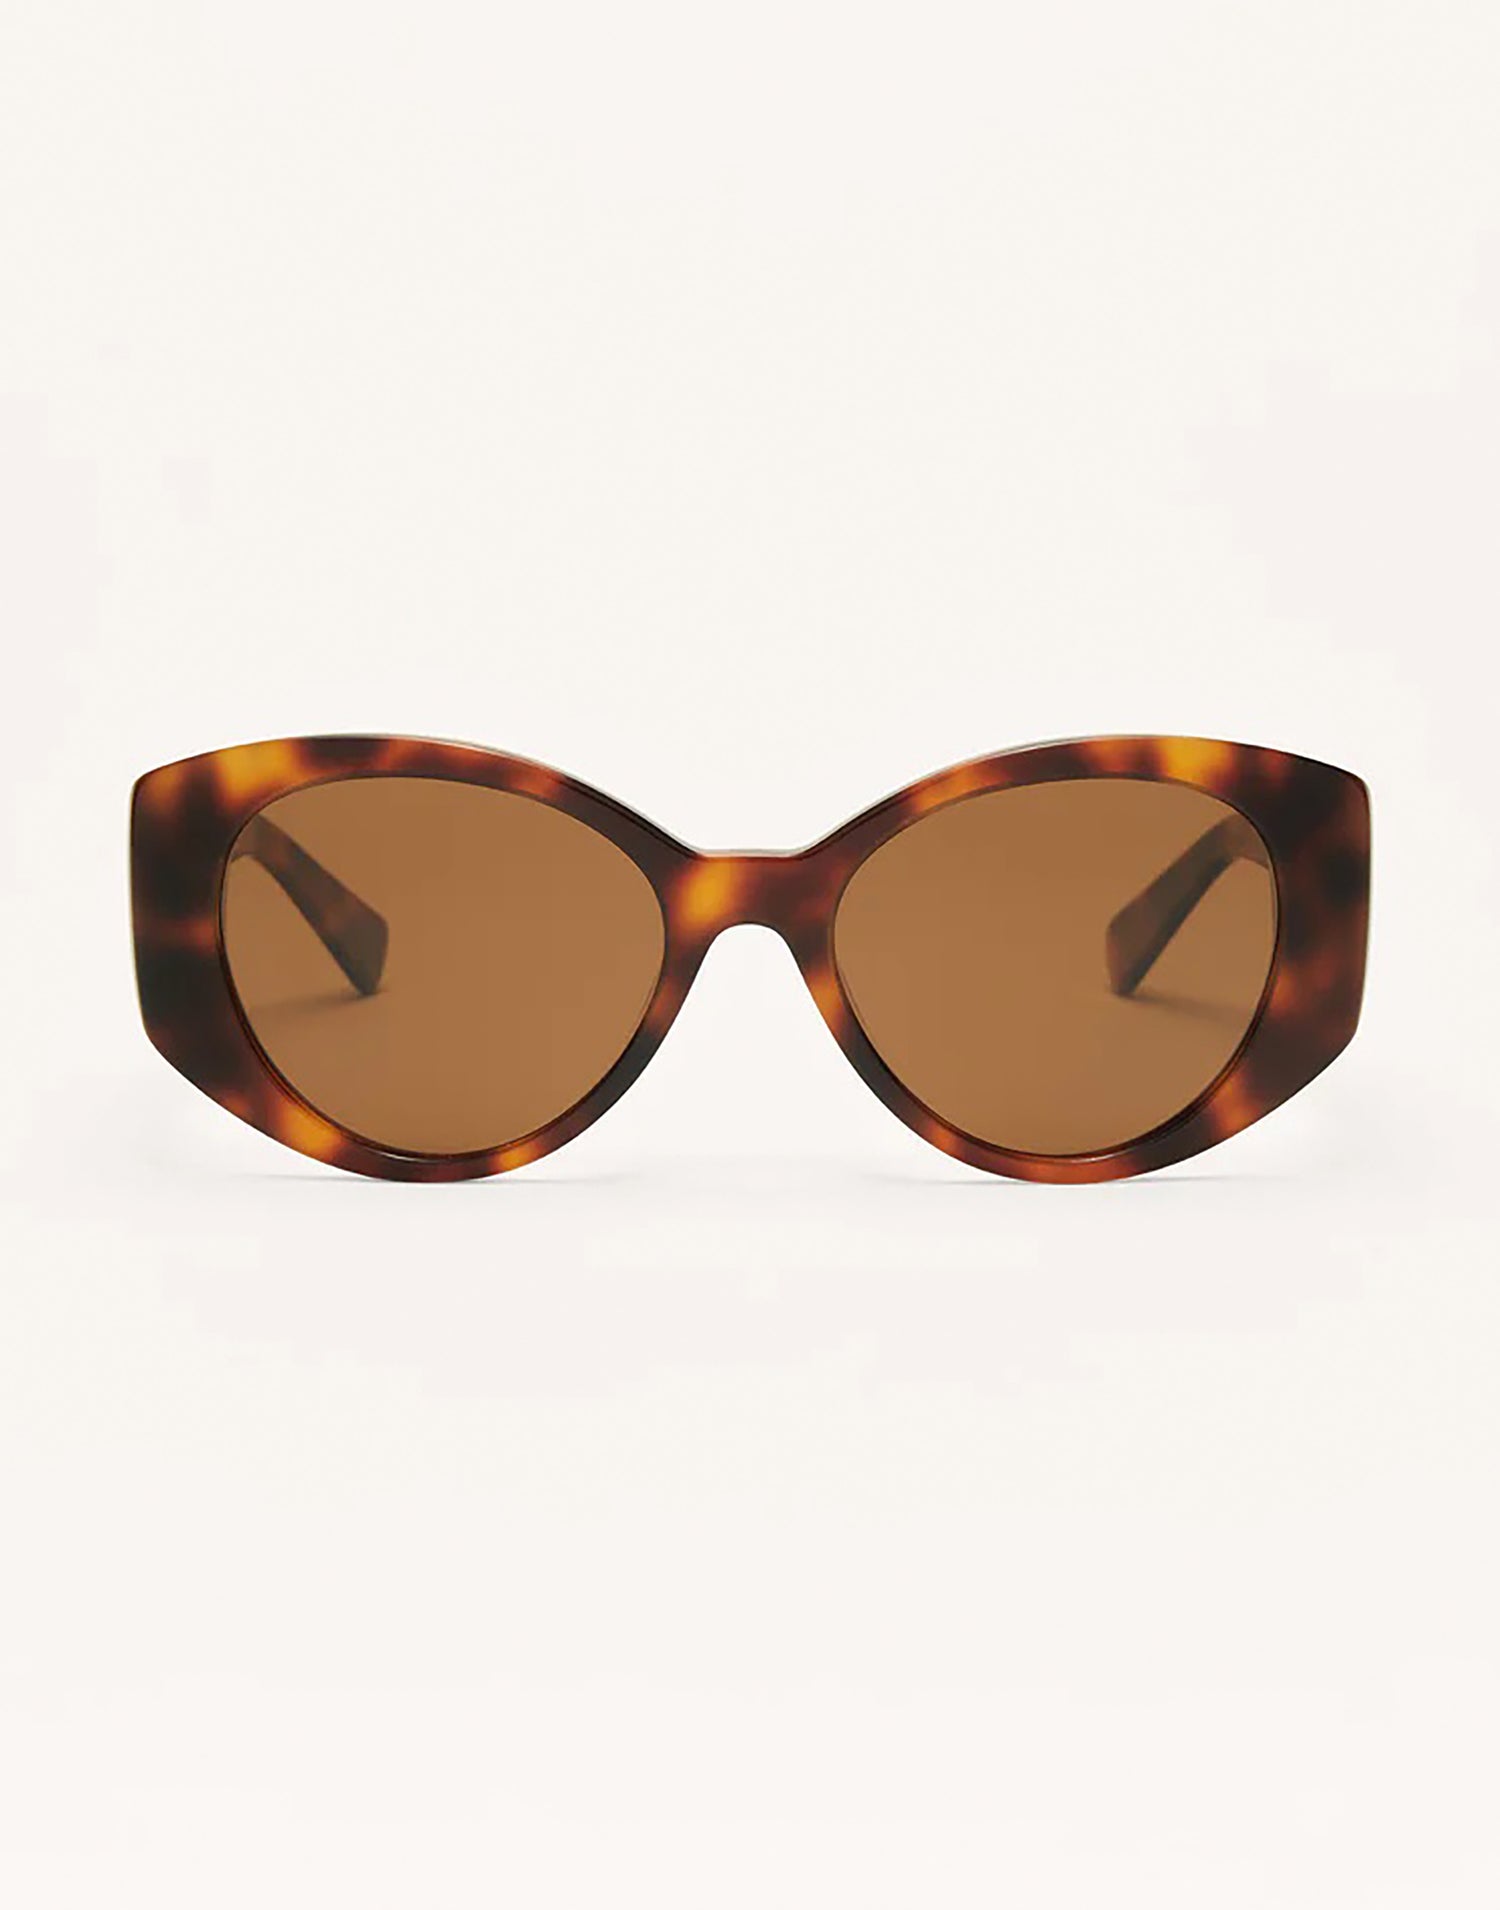 Daydream Sunglasses by Z Supply in Brown Tortoise - Front View